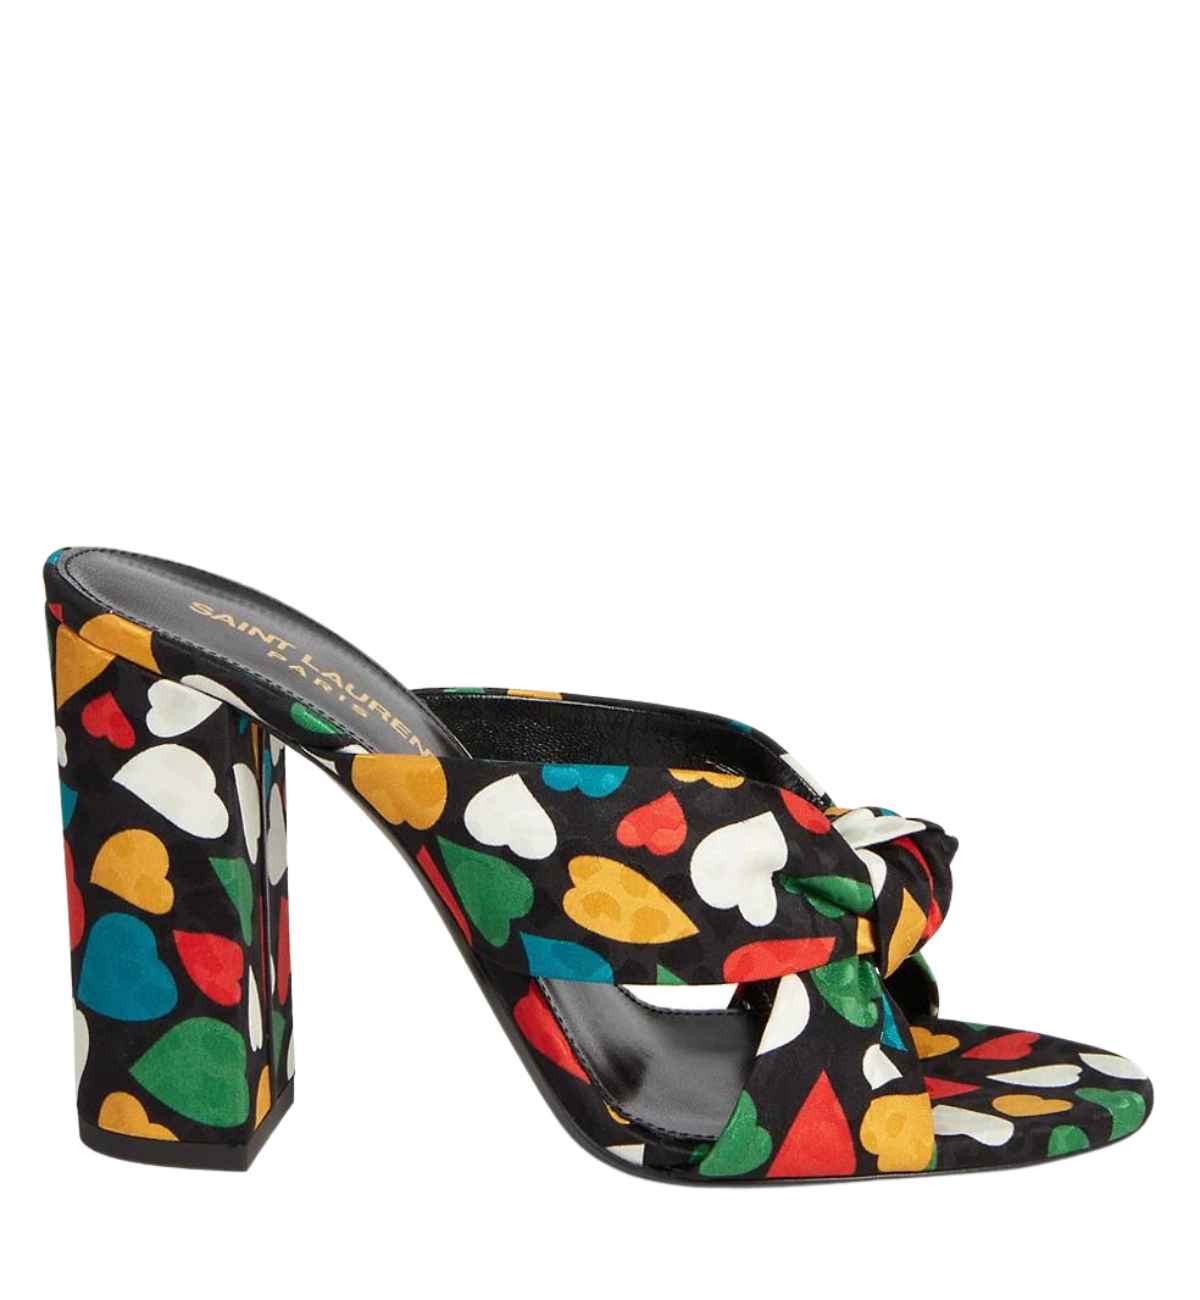 Black open toe heart heel with multicoloured heart pattern all over on white background.